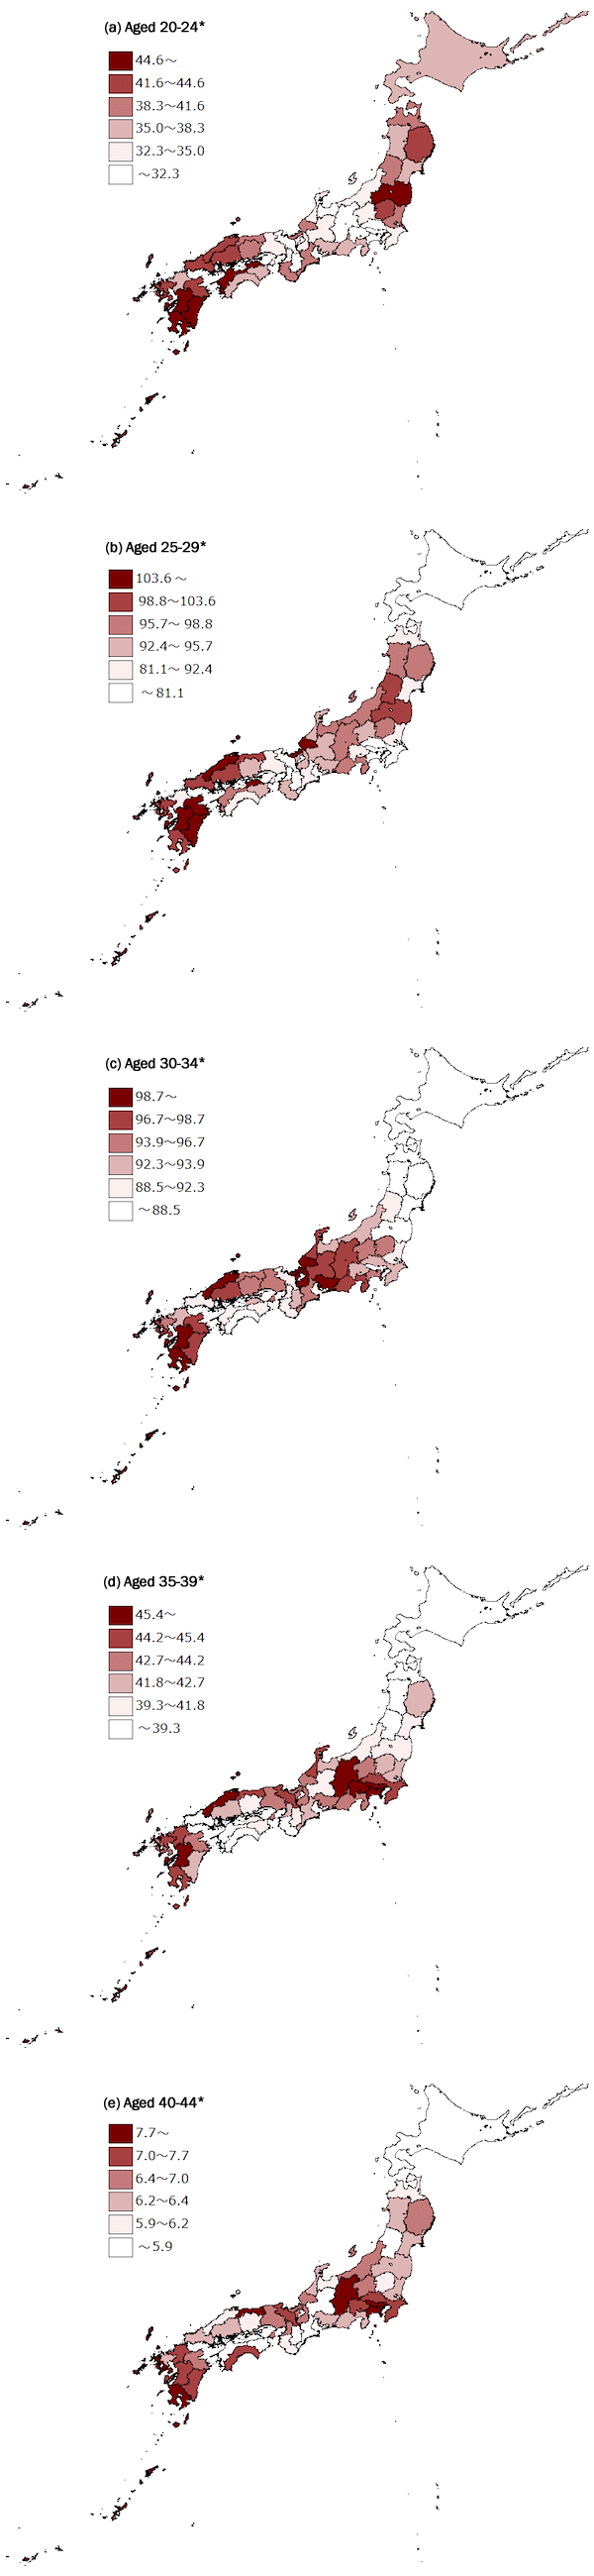 Figure 6: Fertility rates by prefecture and age class (in five-year increments) (per 1,000 women in population)